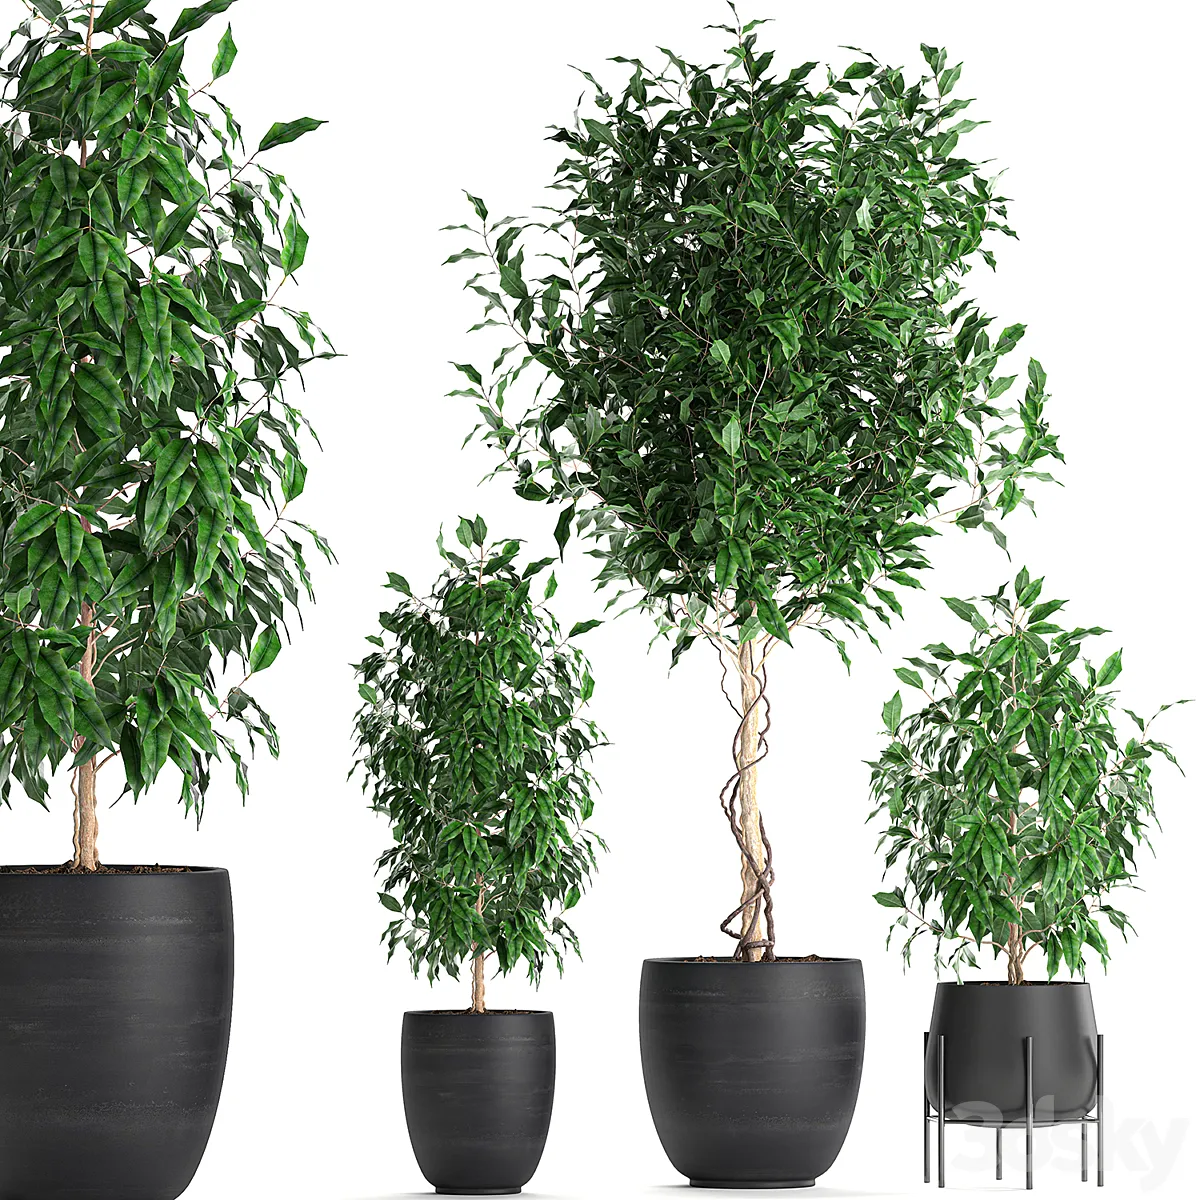 A collection of small beautiful trees in black pots